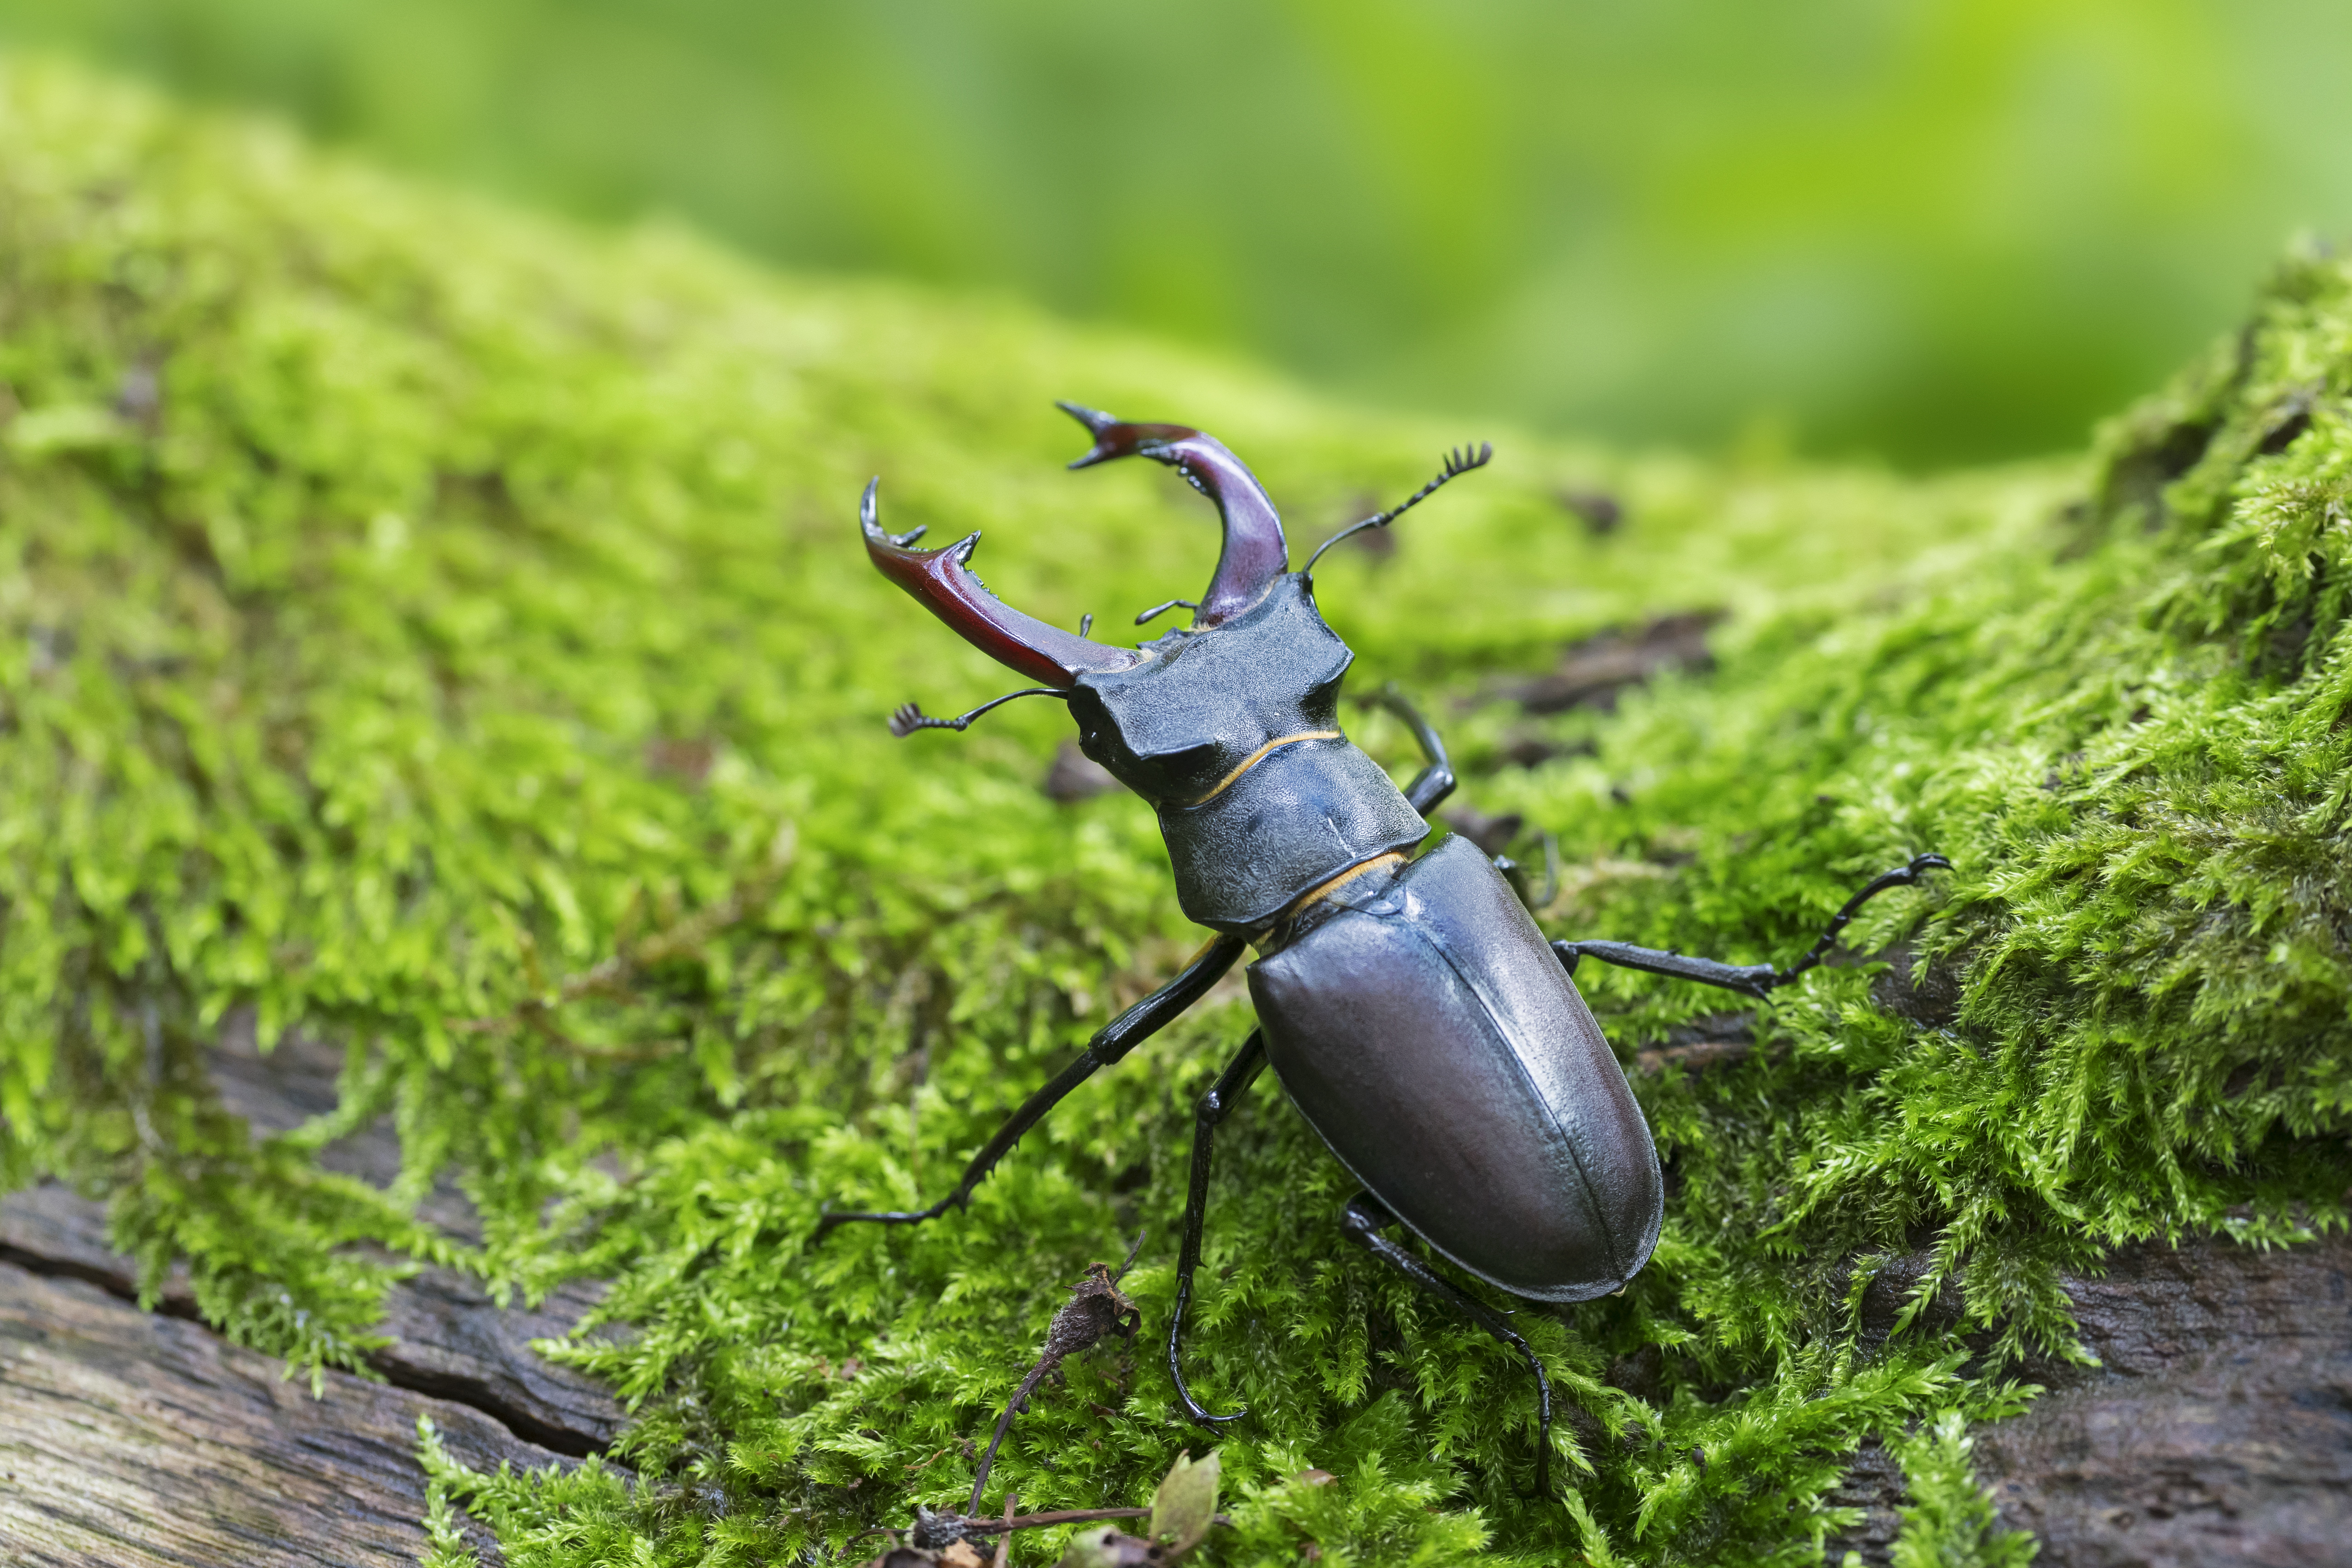 British beetle guide: where to see and how to identify these fascinating  insects 